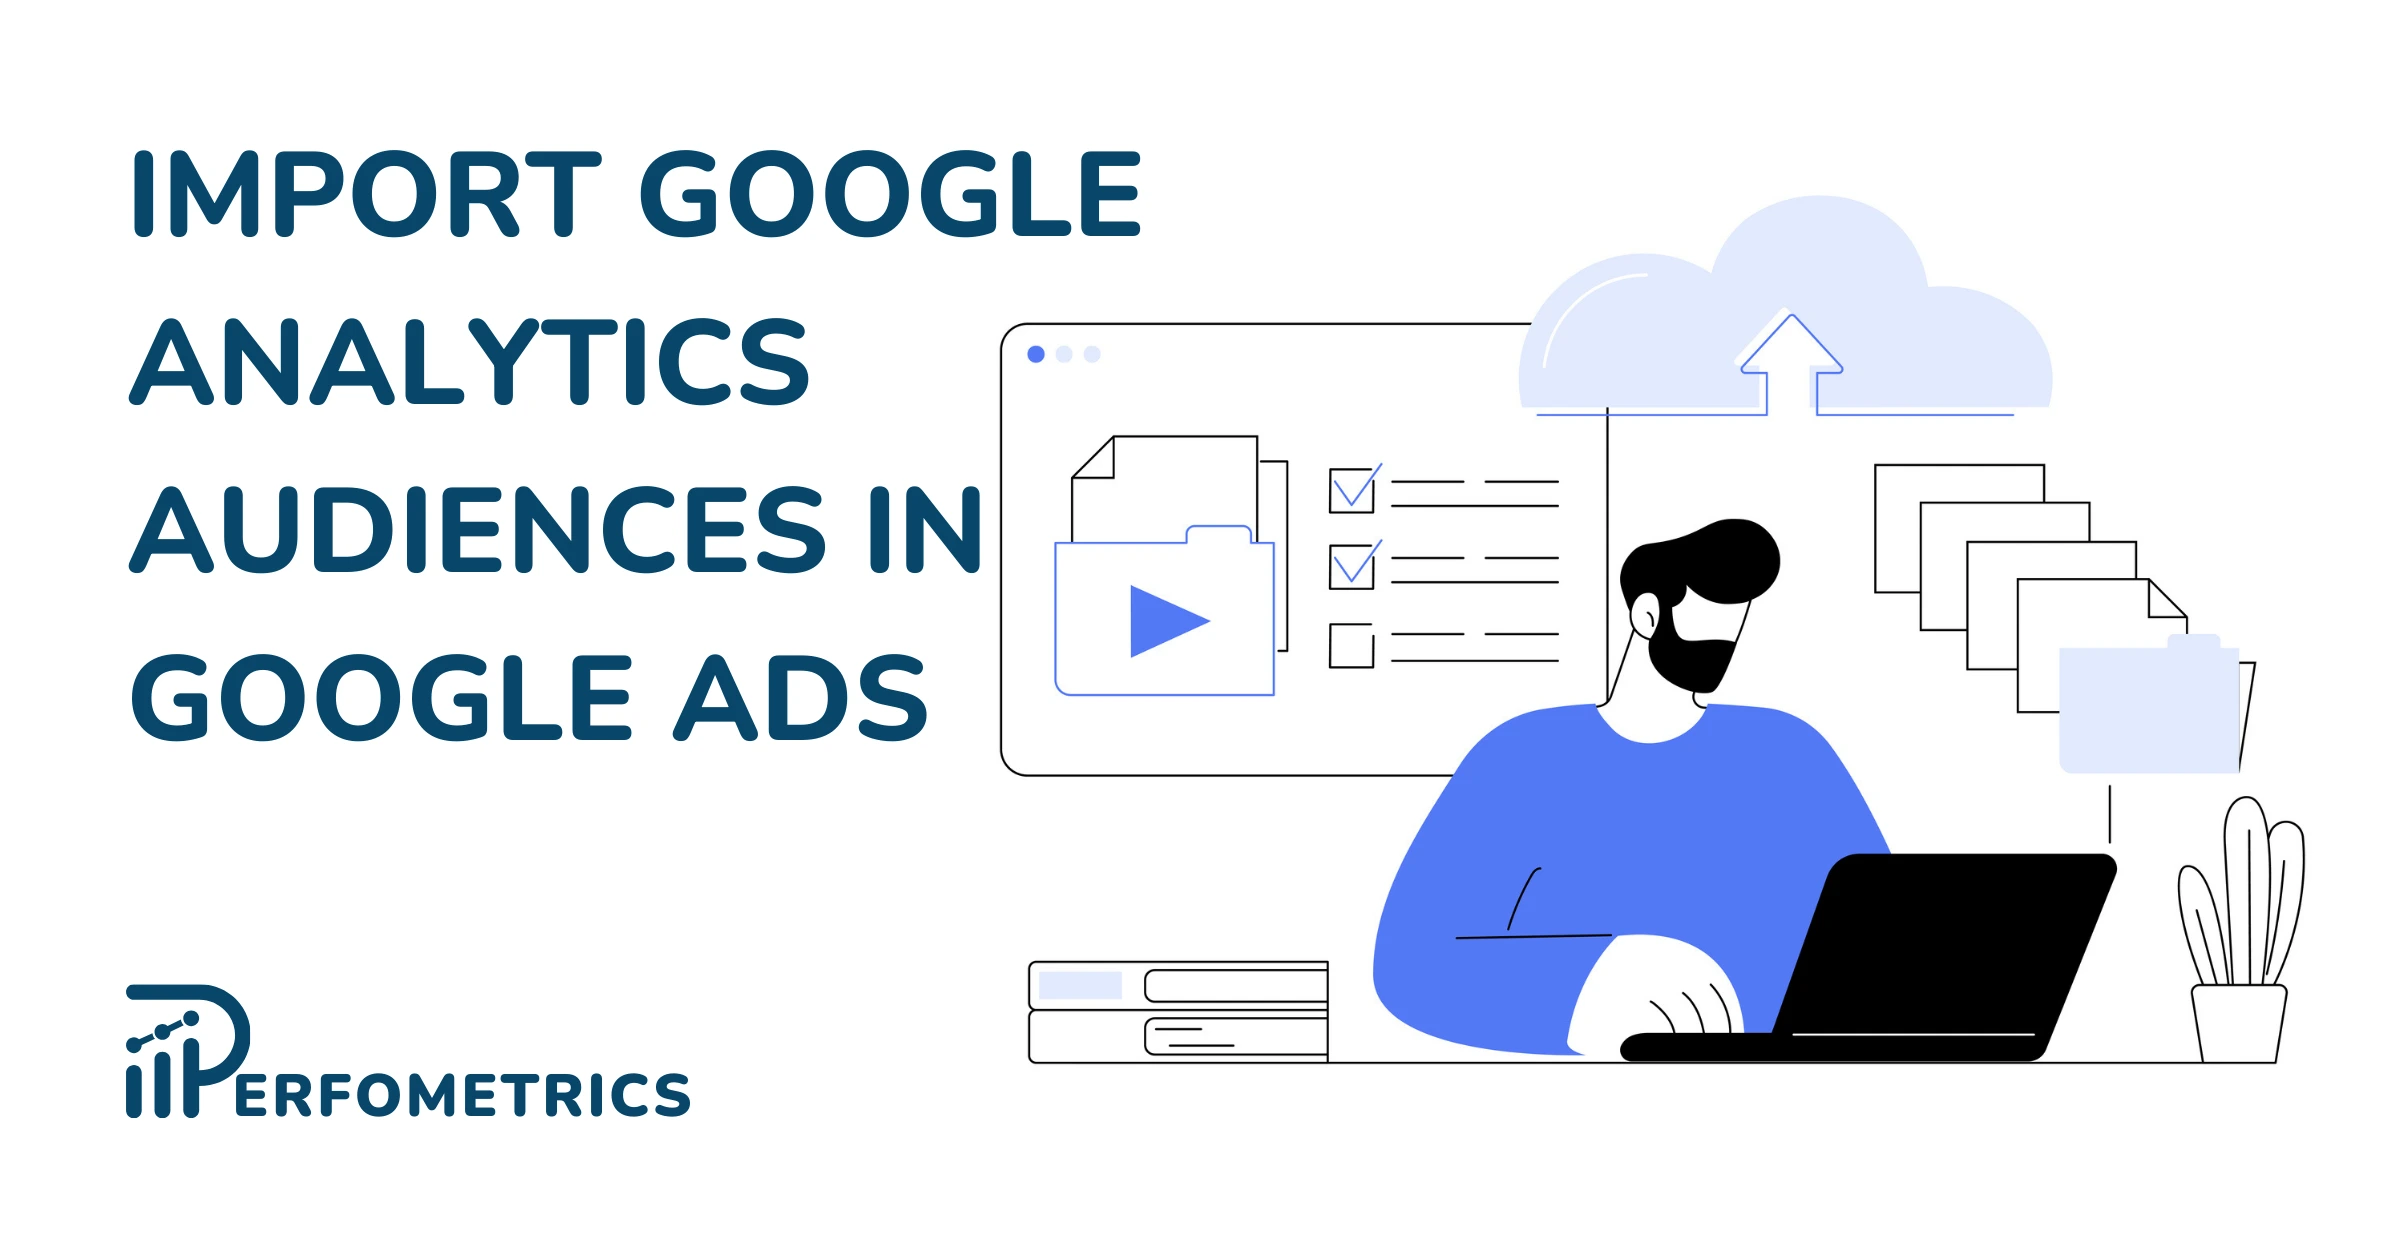 How to Import Google Analytics Audience to Google Ads